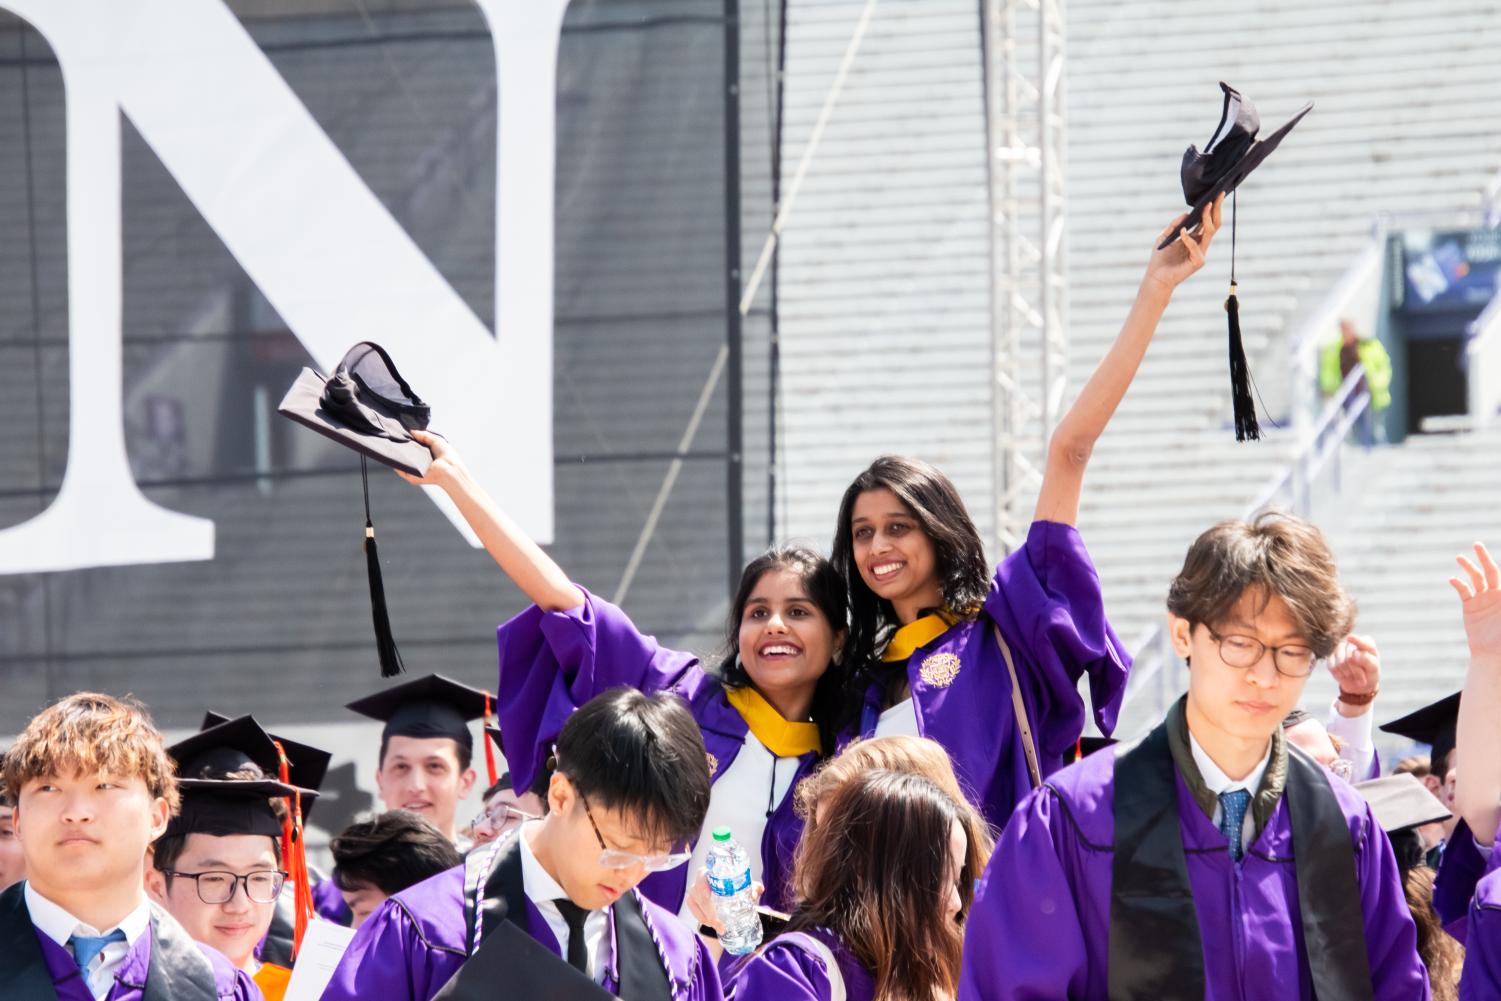 Two students with purple robes hold their arms up each student with a black cap in hand.